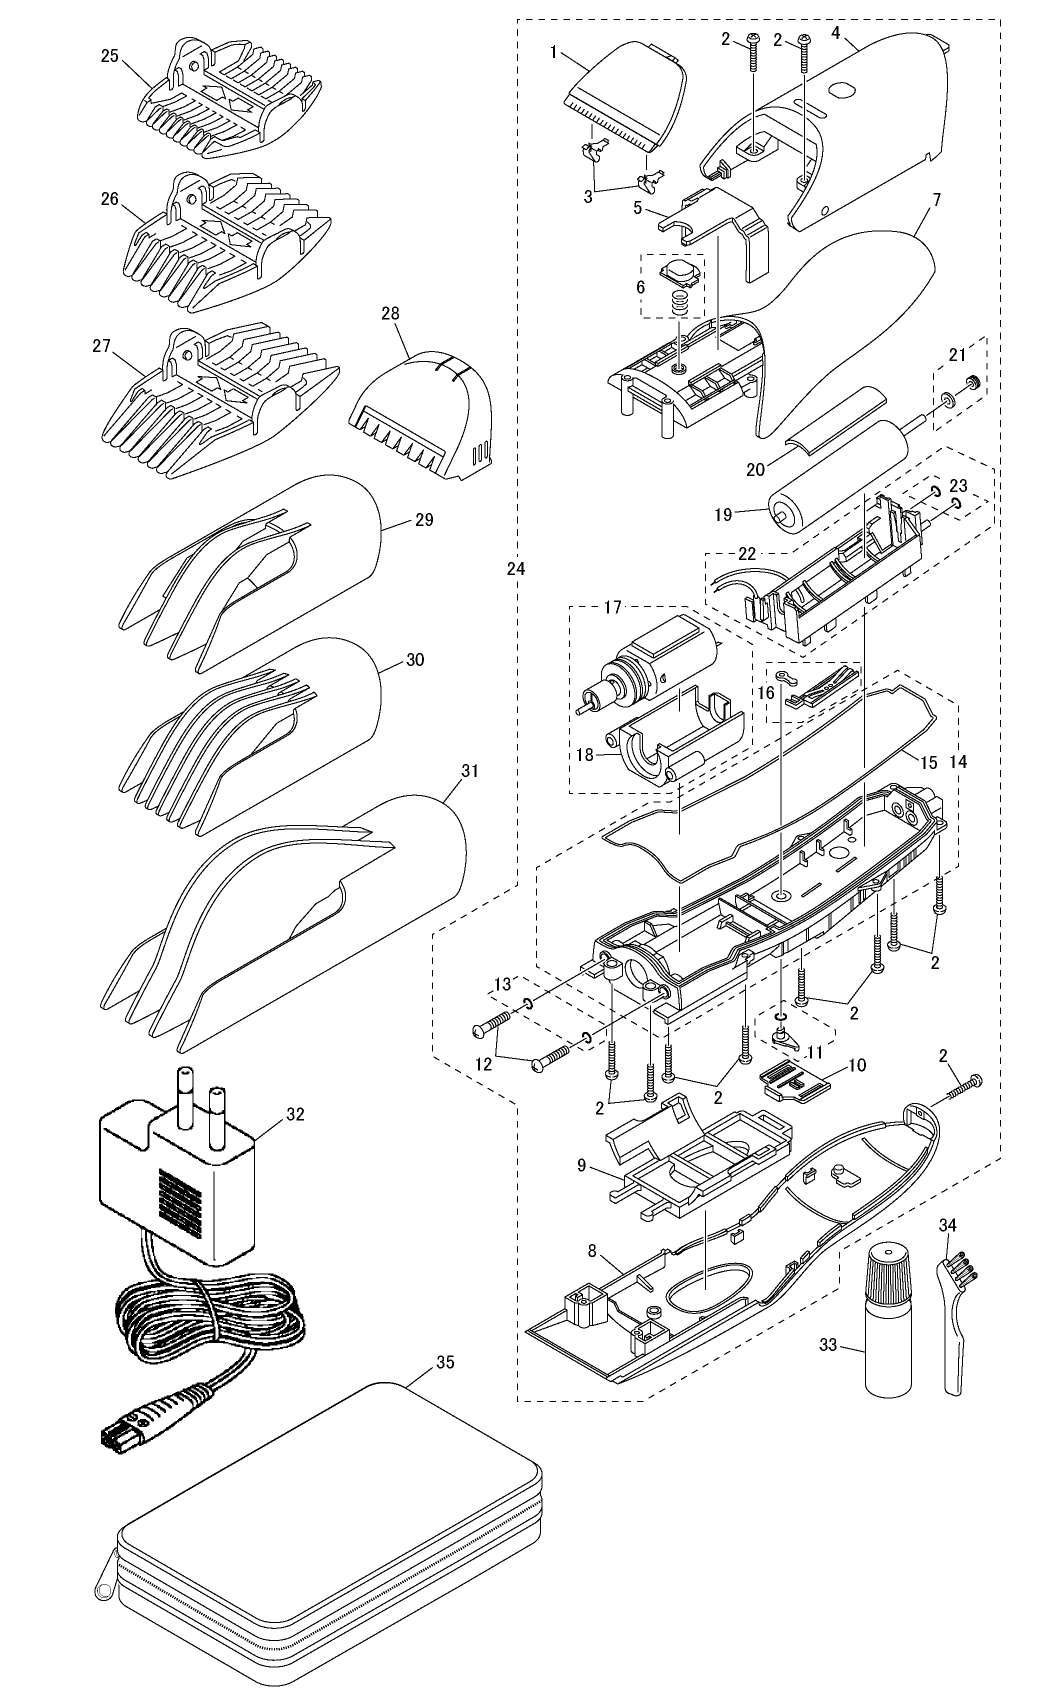 ER-CA70: Exploded View